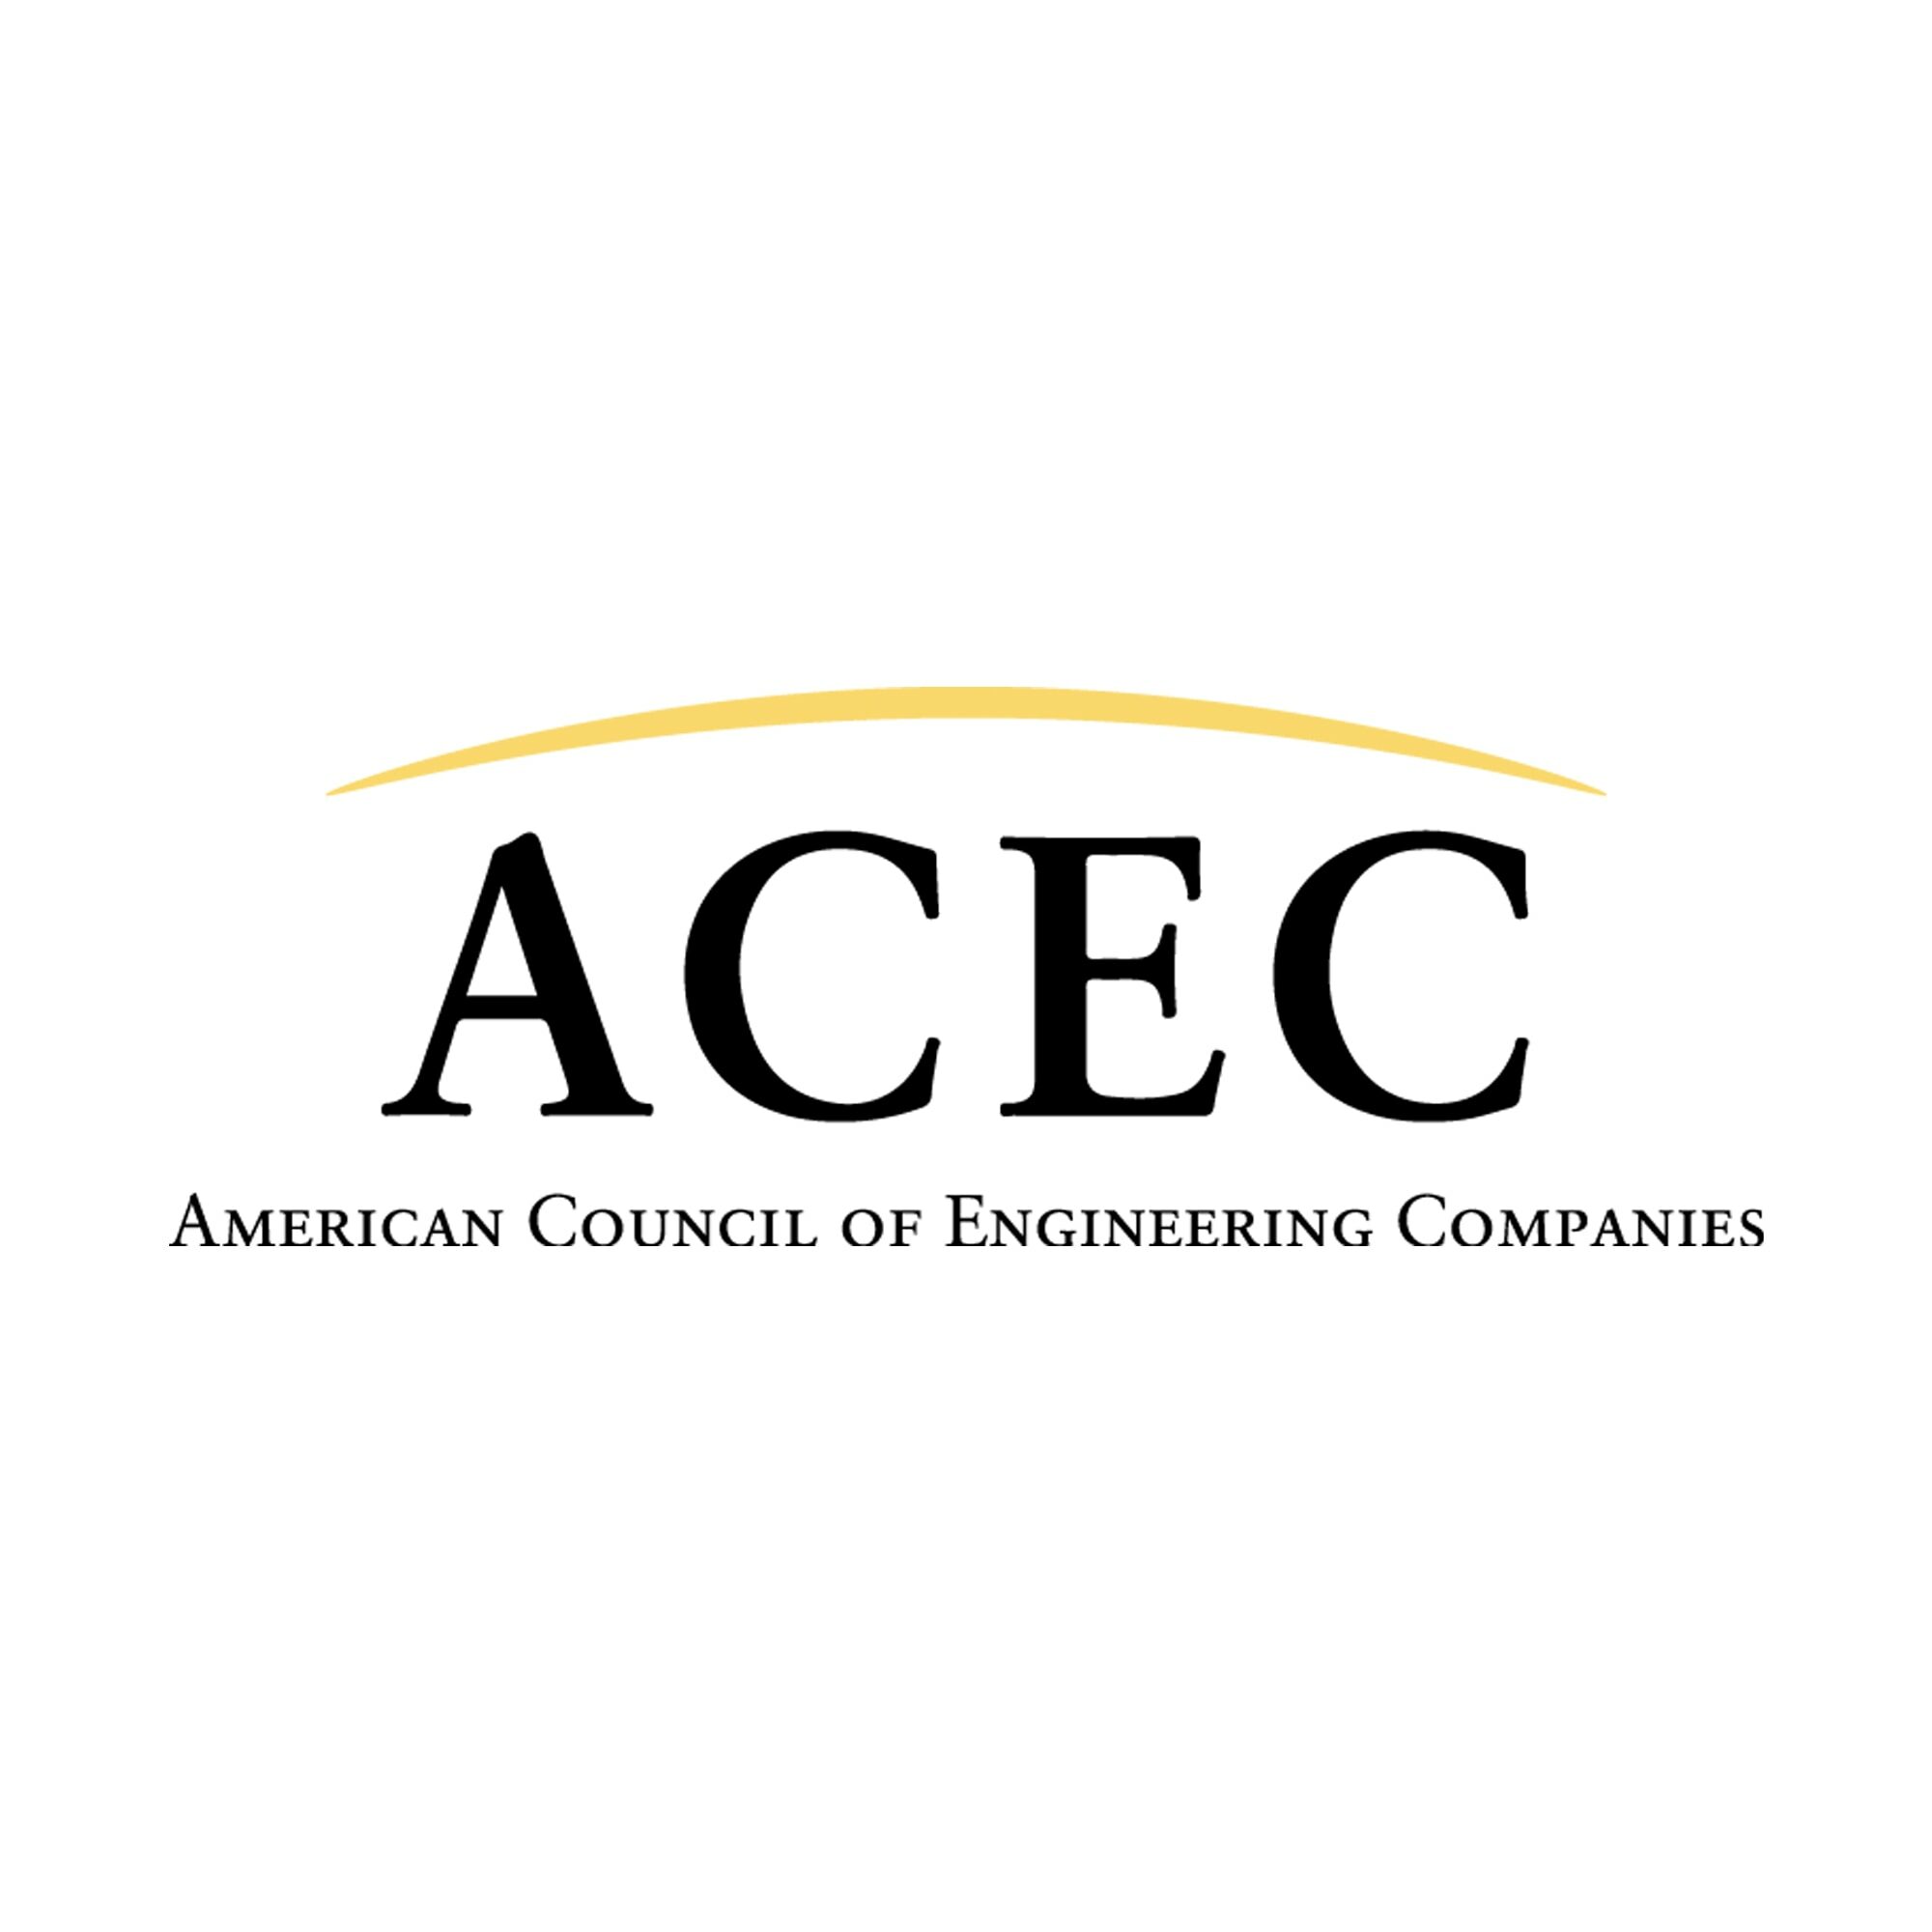 American Council of Engineering Companies logo